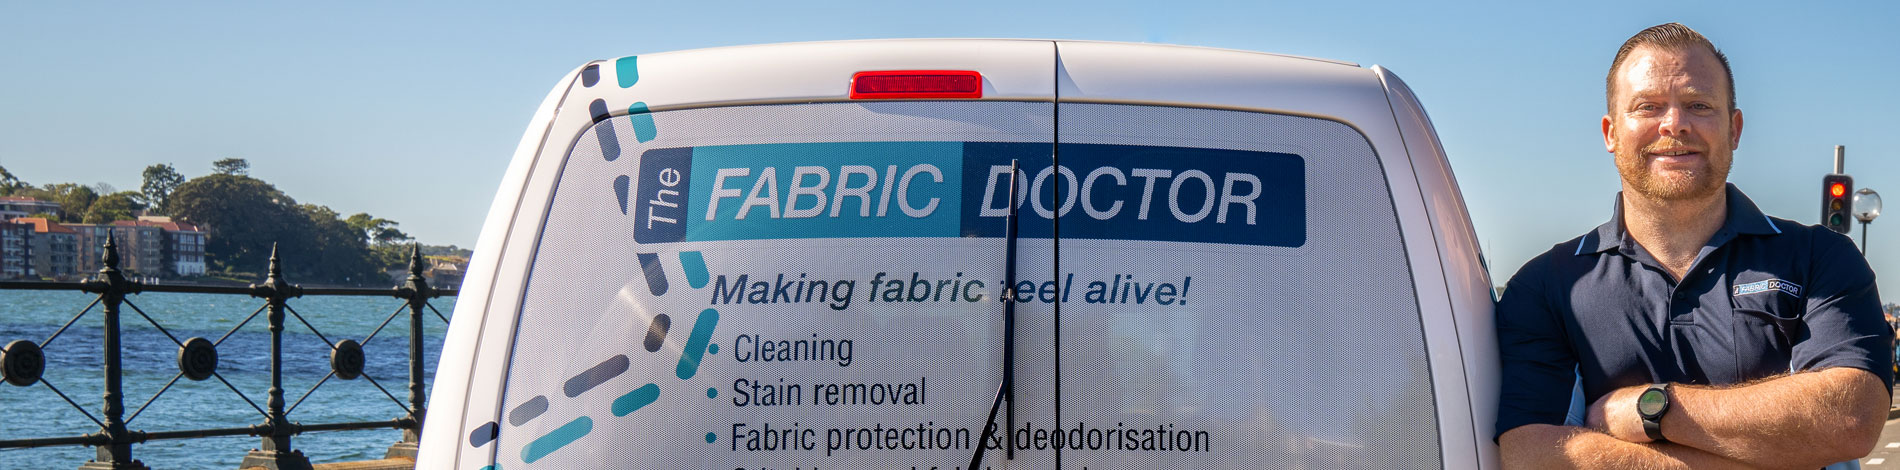 Fabric Upholstery Services